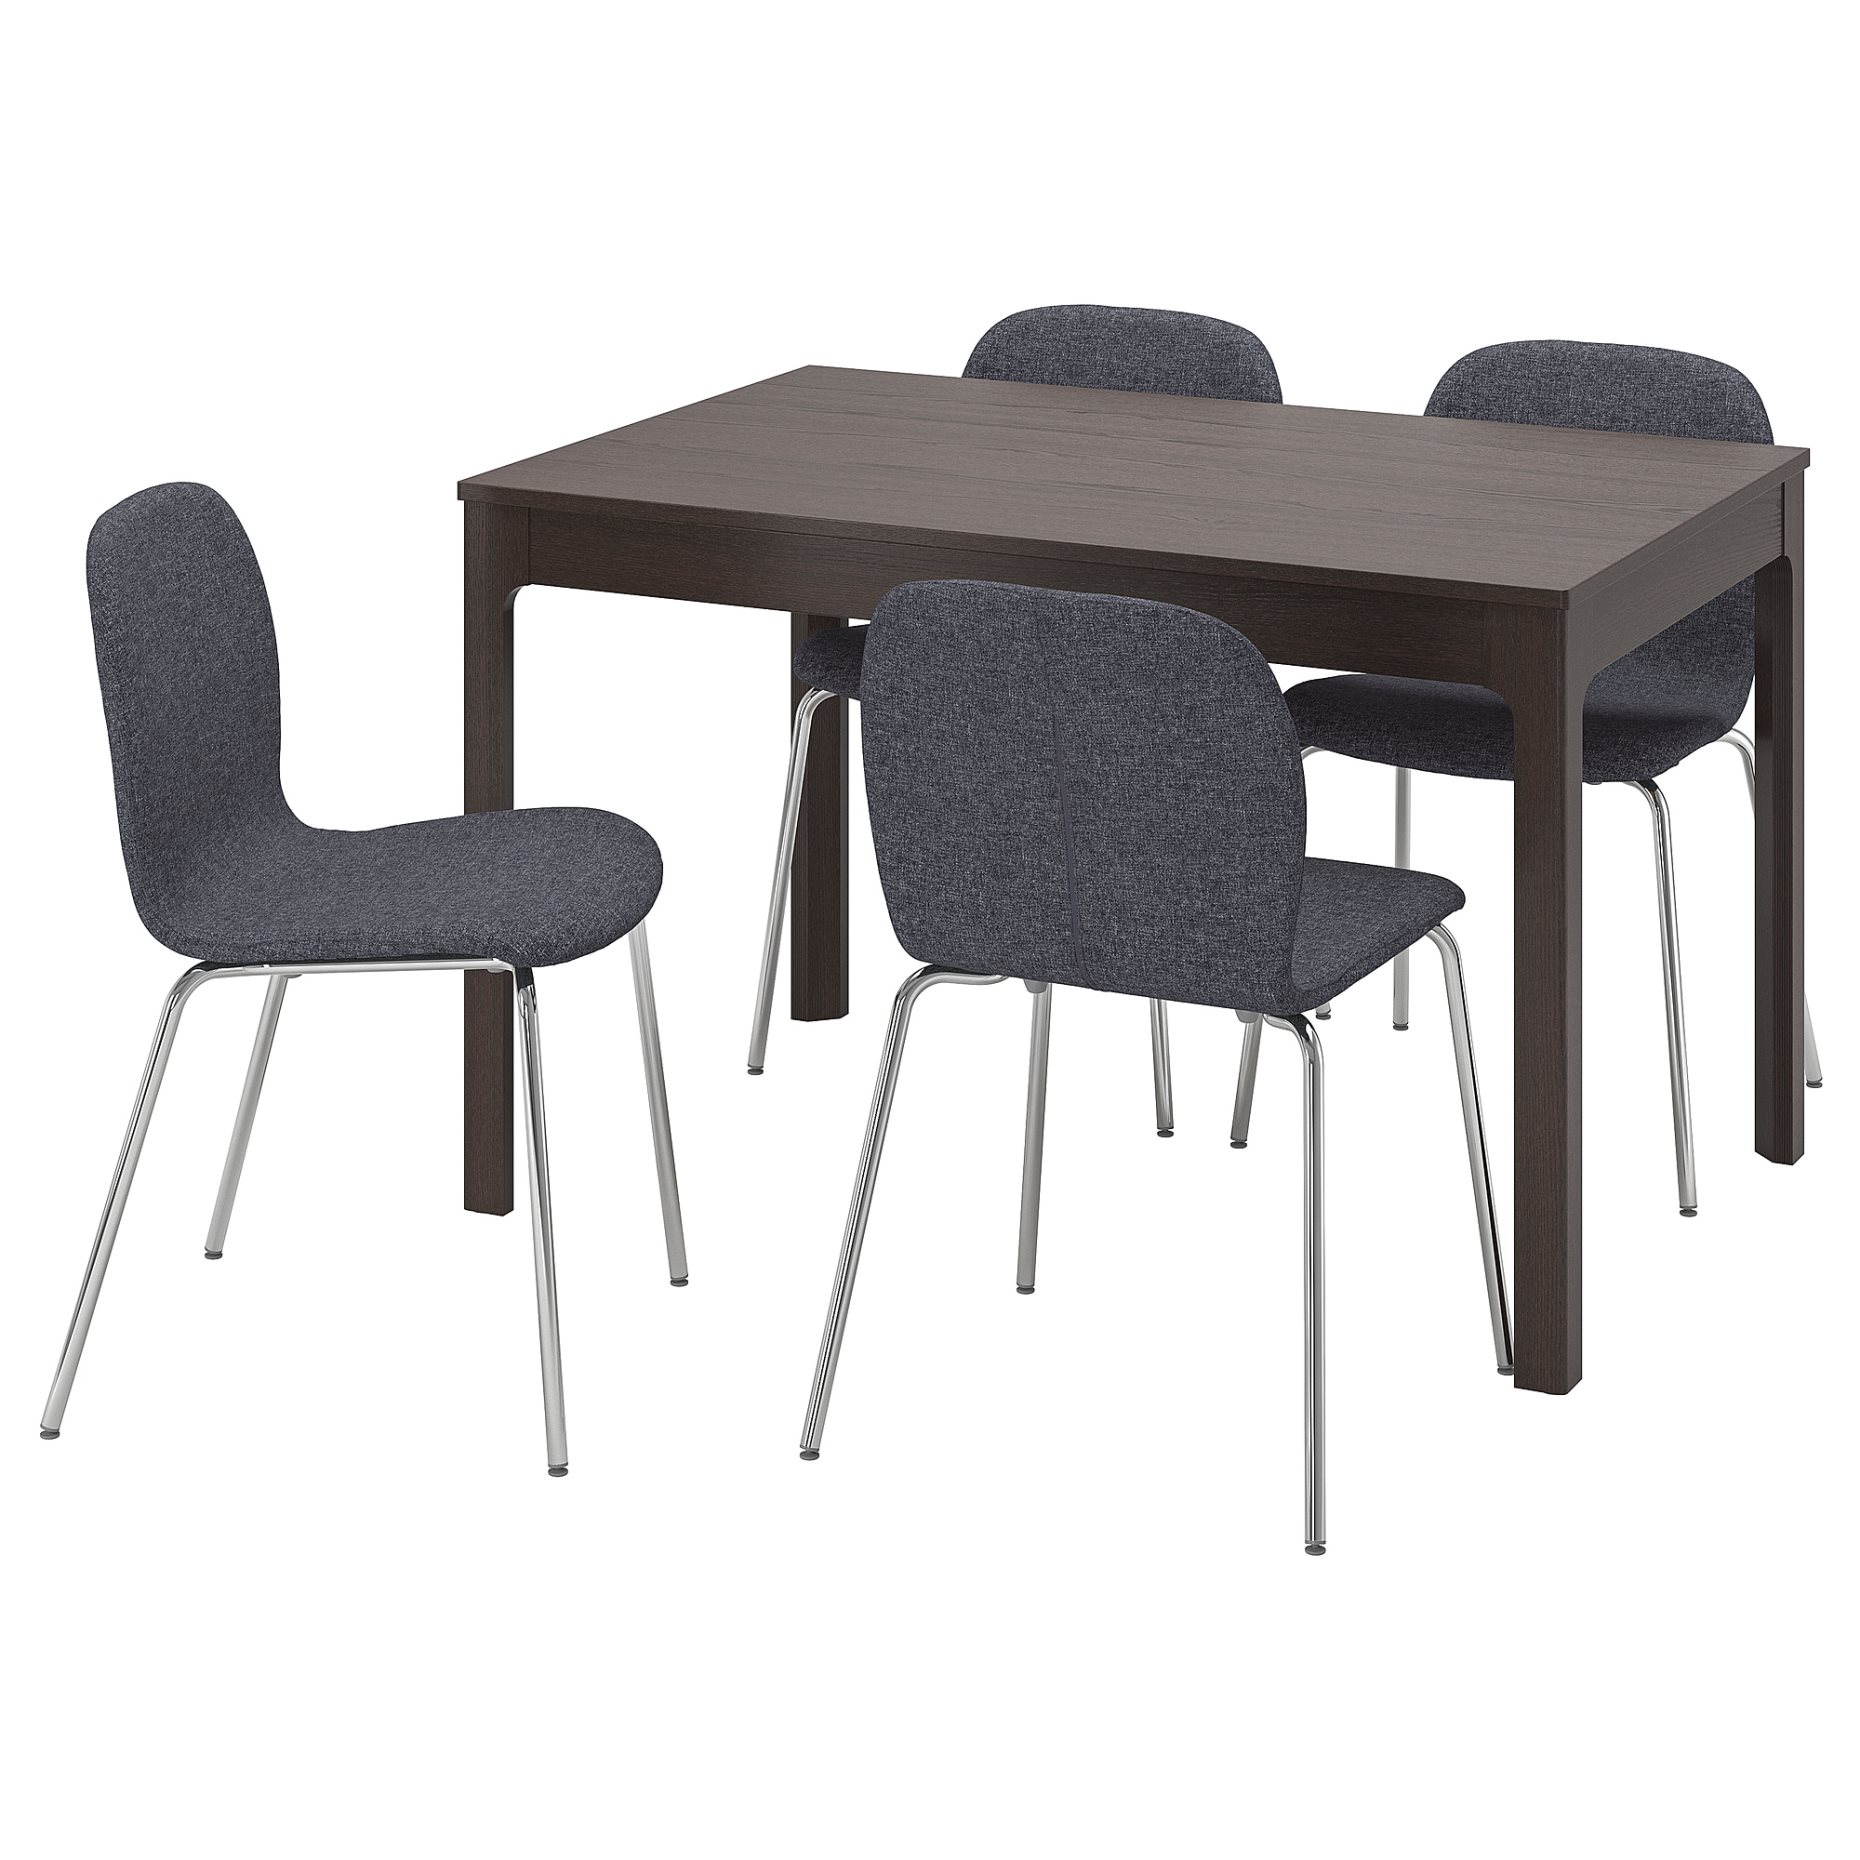 EKEDALEN/KARLPETTER, table and 4 chairs, 120/180x80 cm, 095.167.68